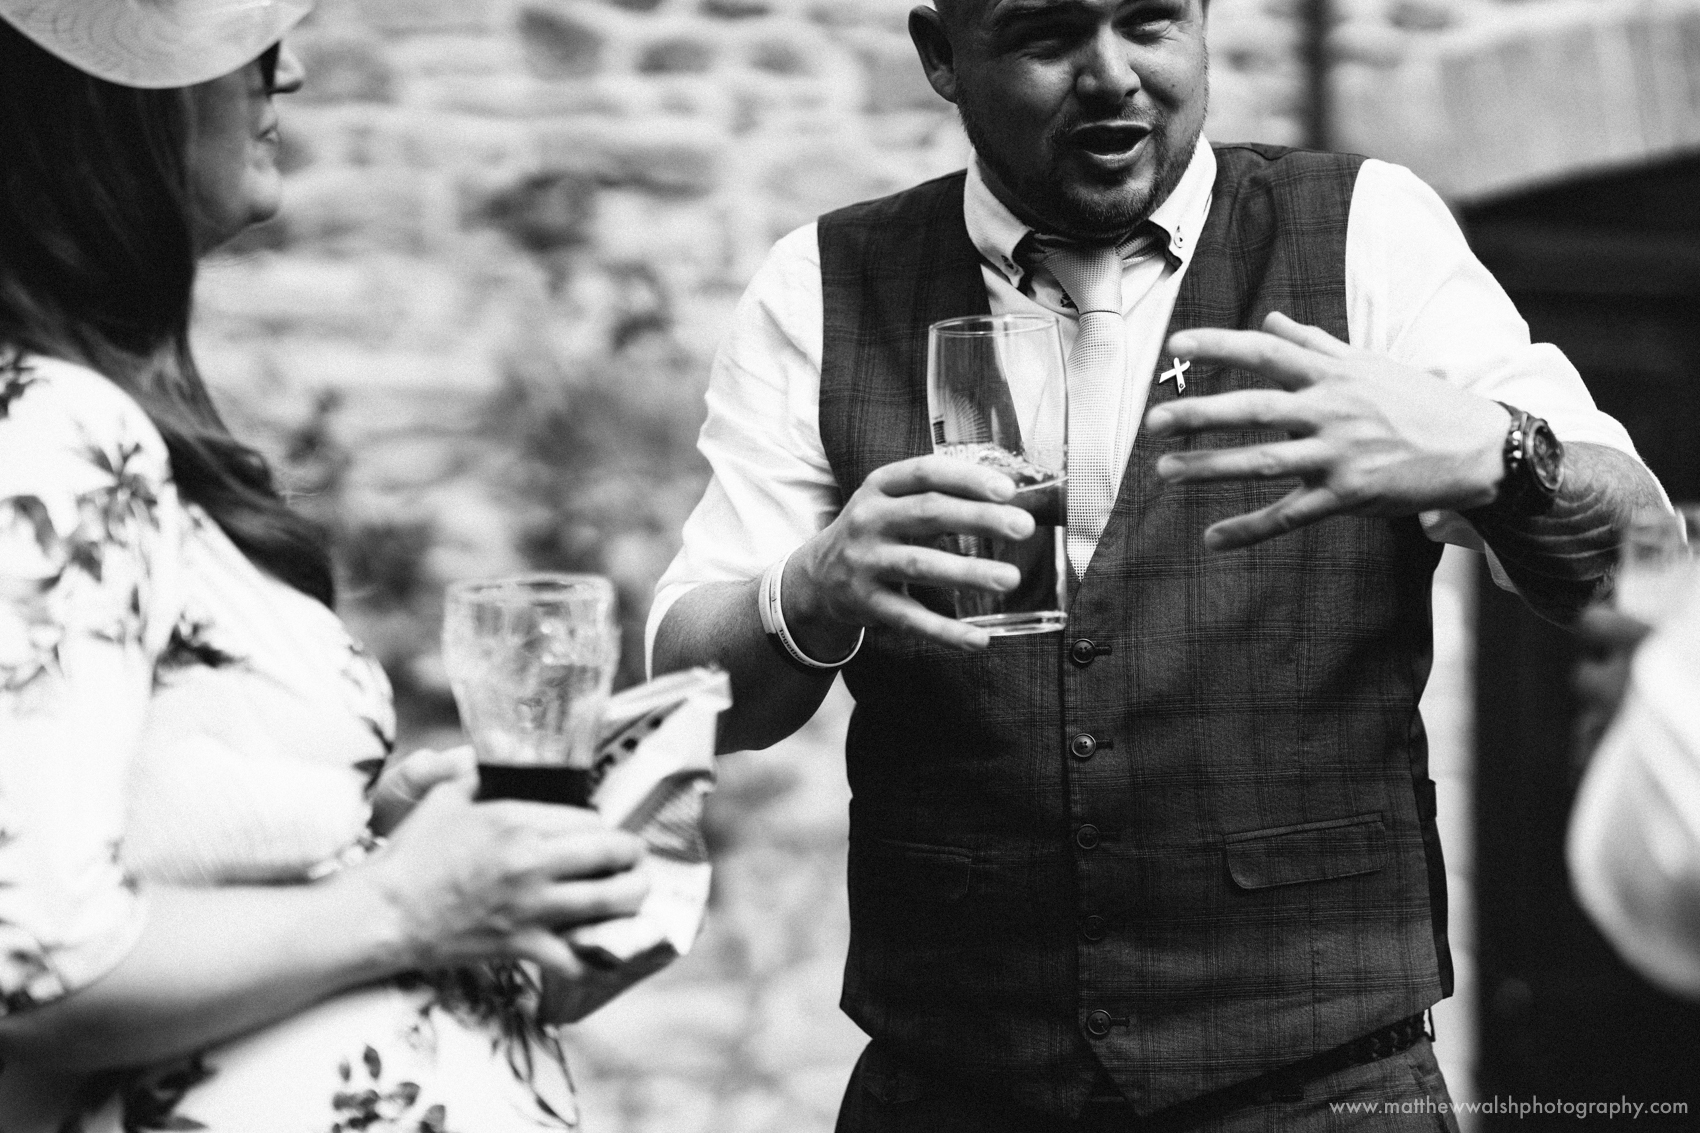 A guest getting quite animated as he tells a story to another wedding guest